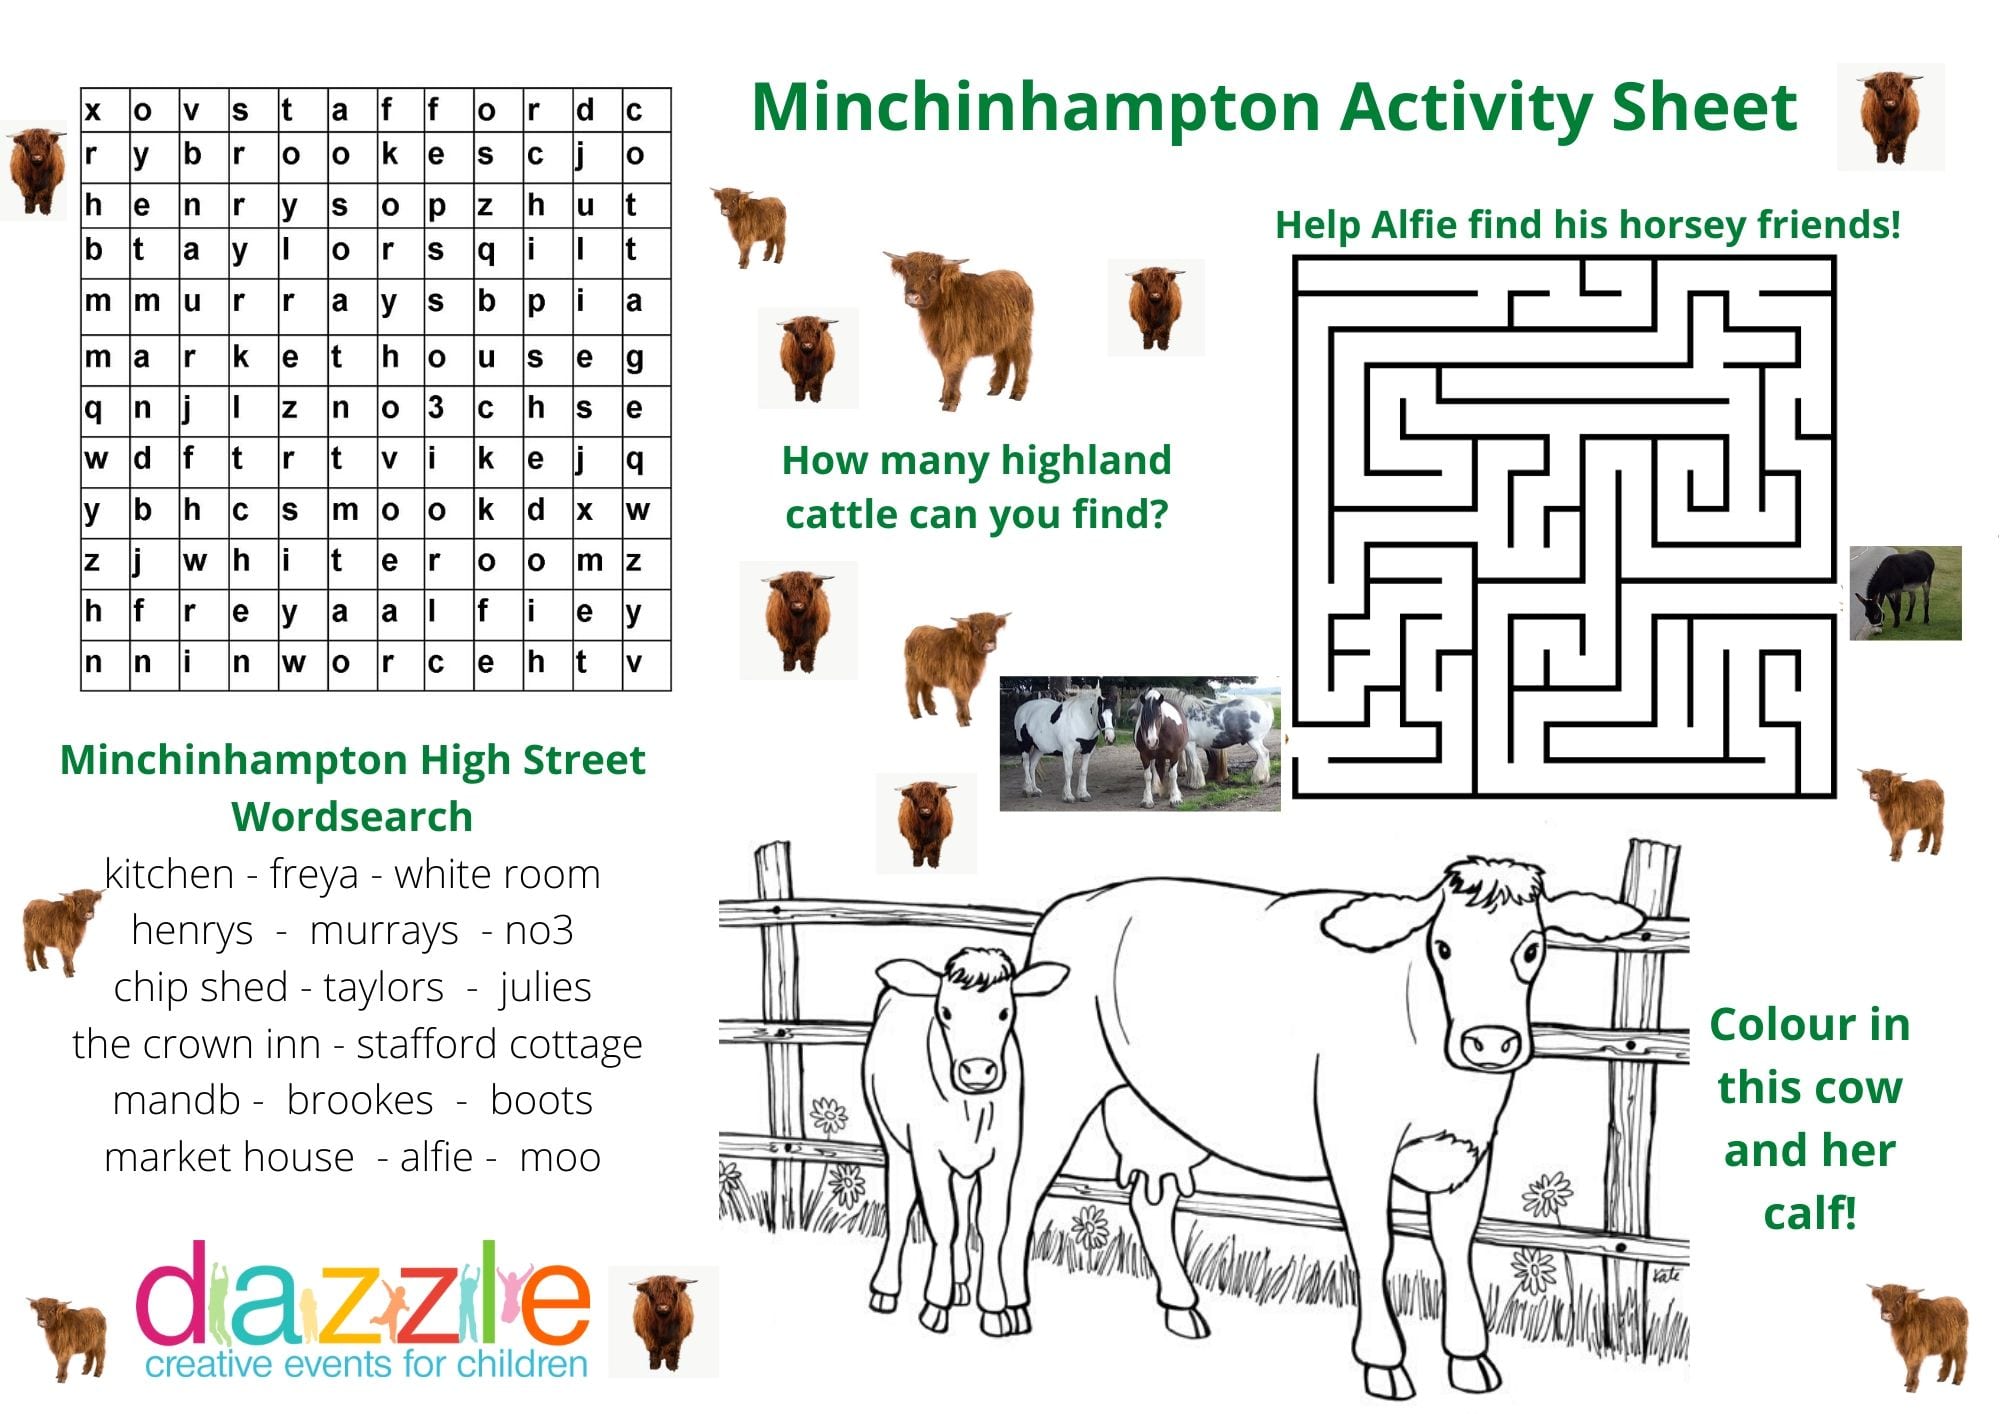 FREE kids weekly activity sheets - Dazzle Workshops